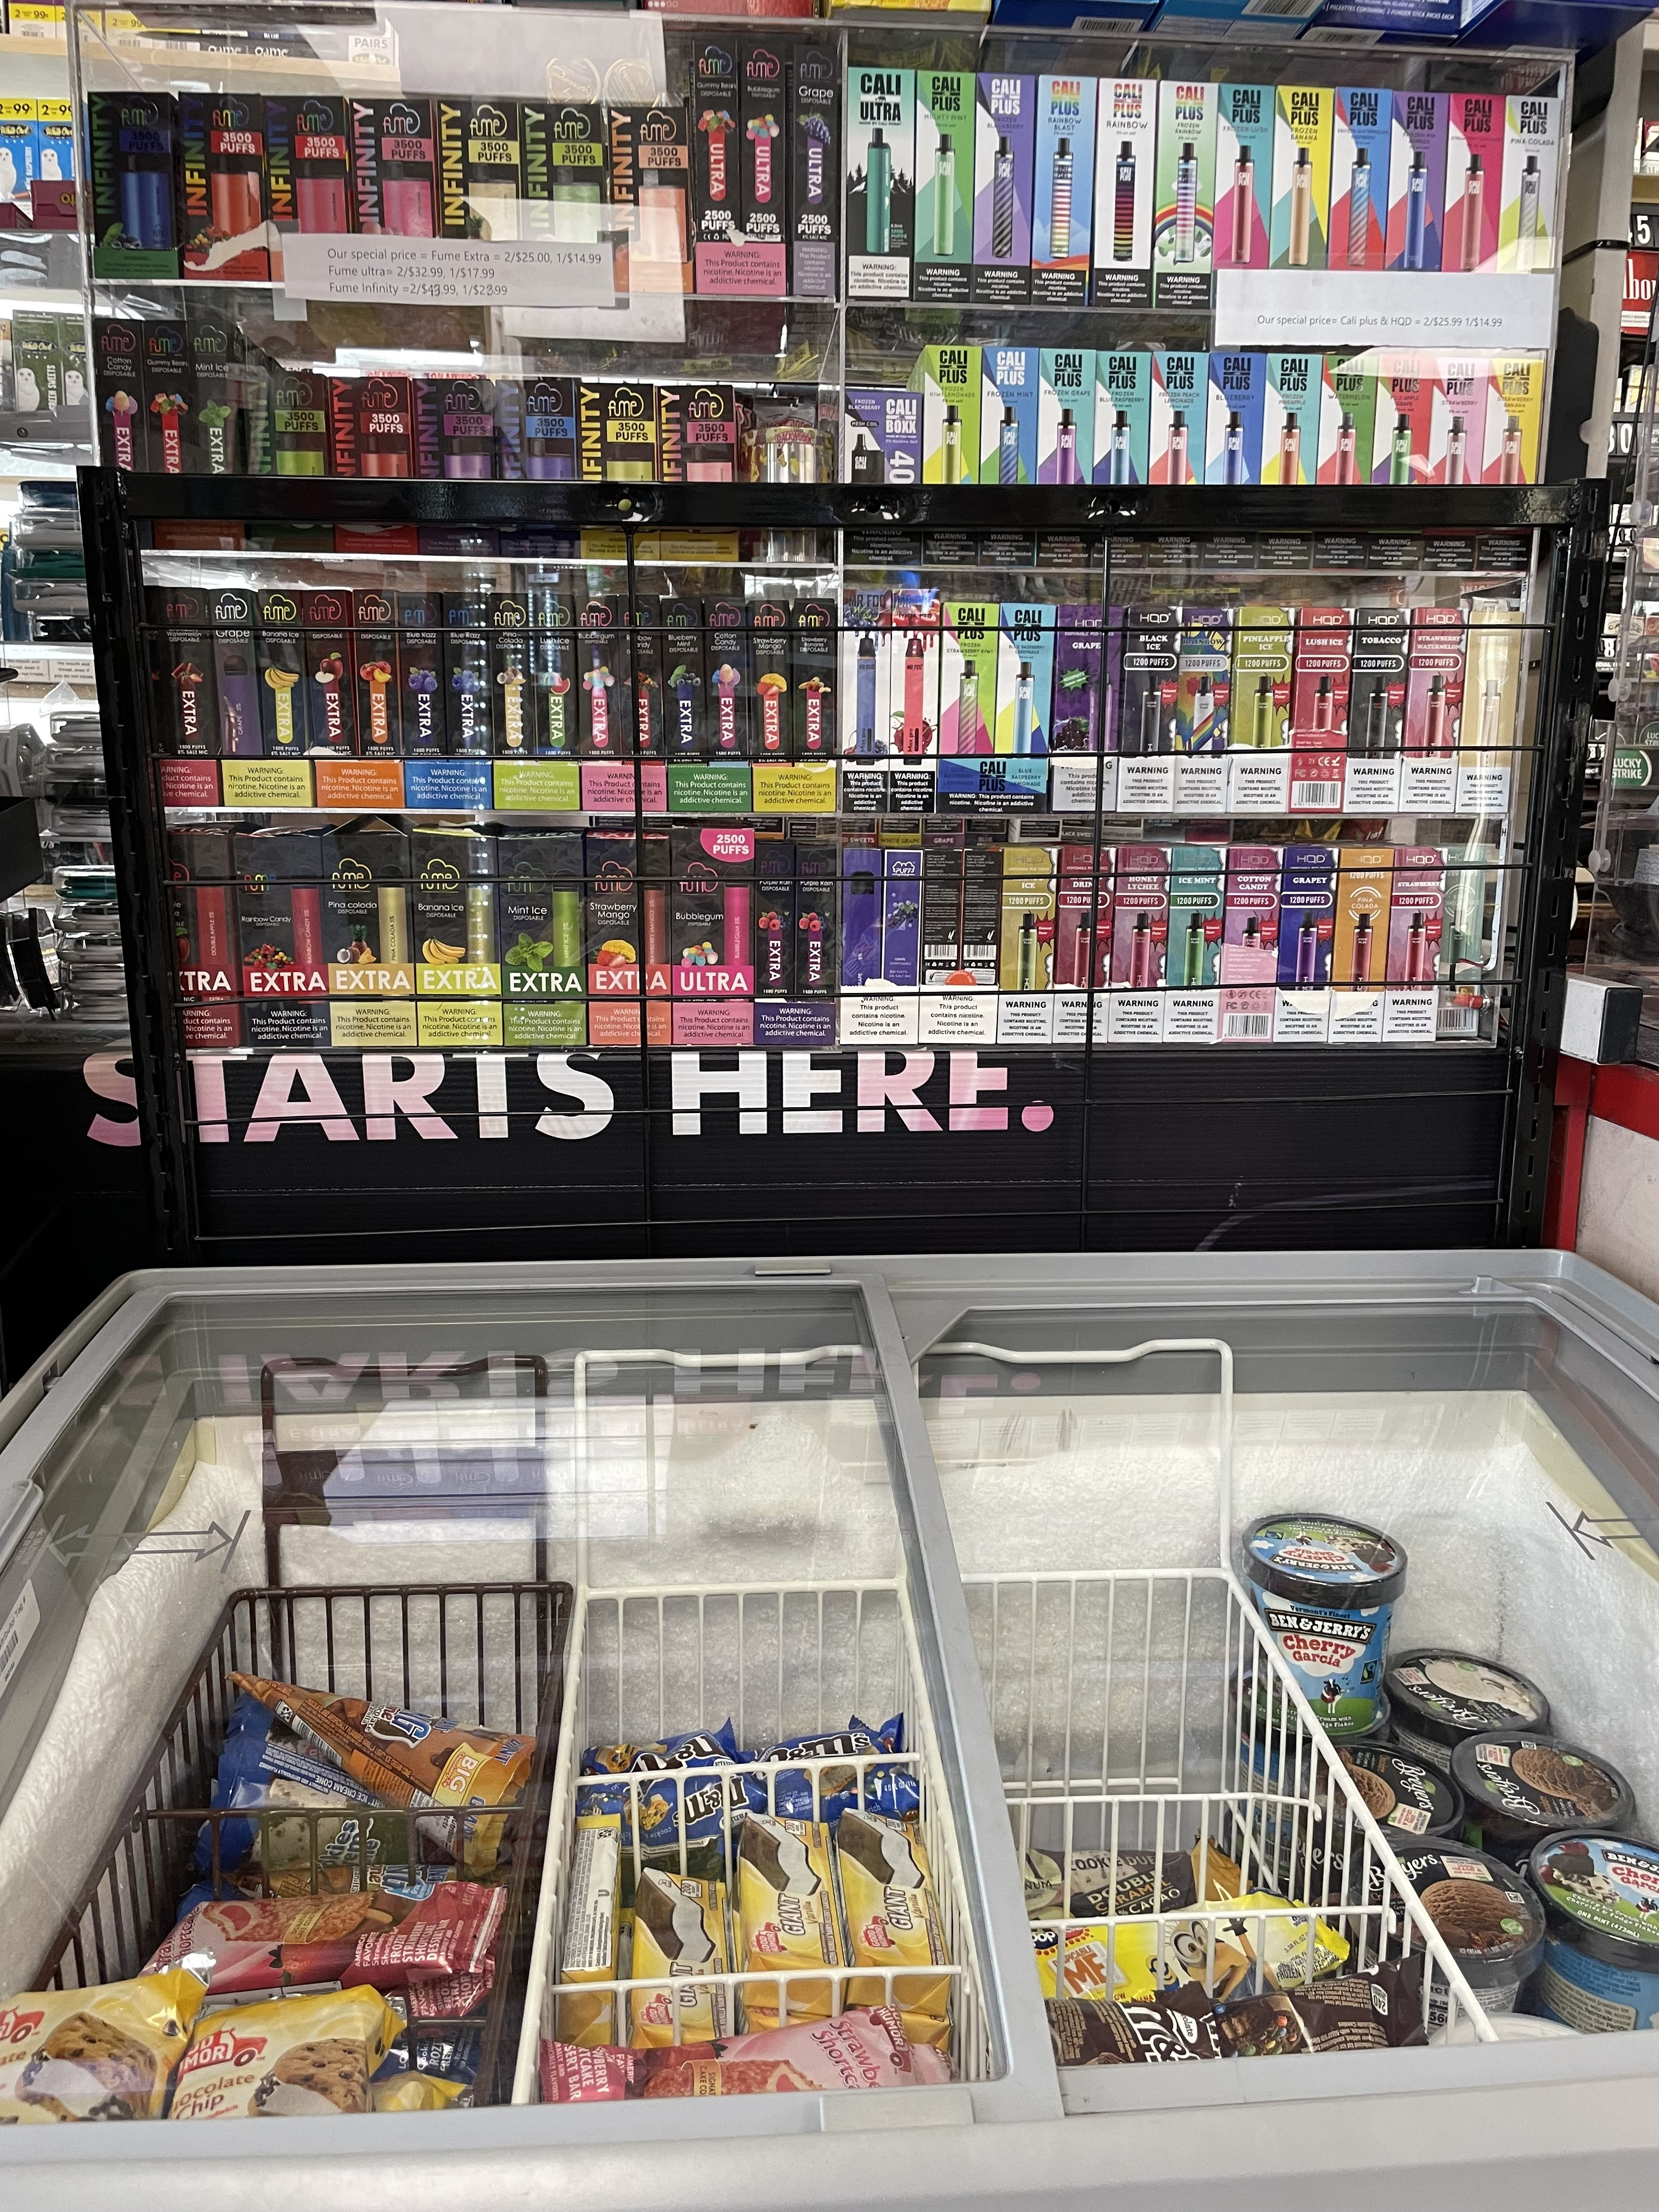 flavored e-cig display above an ice cream cooler 